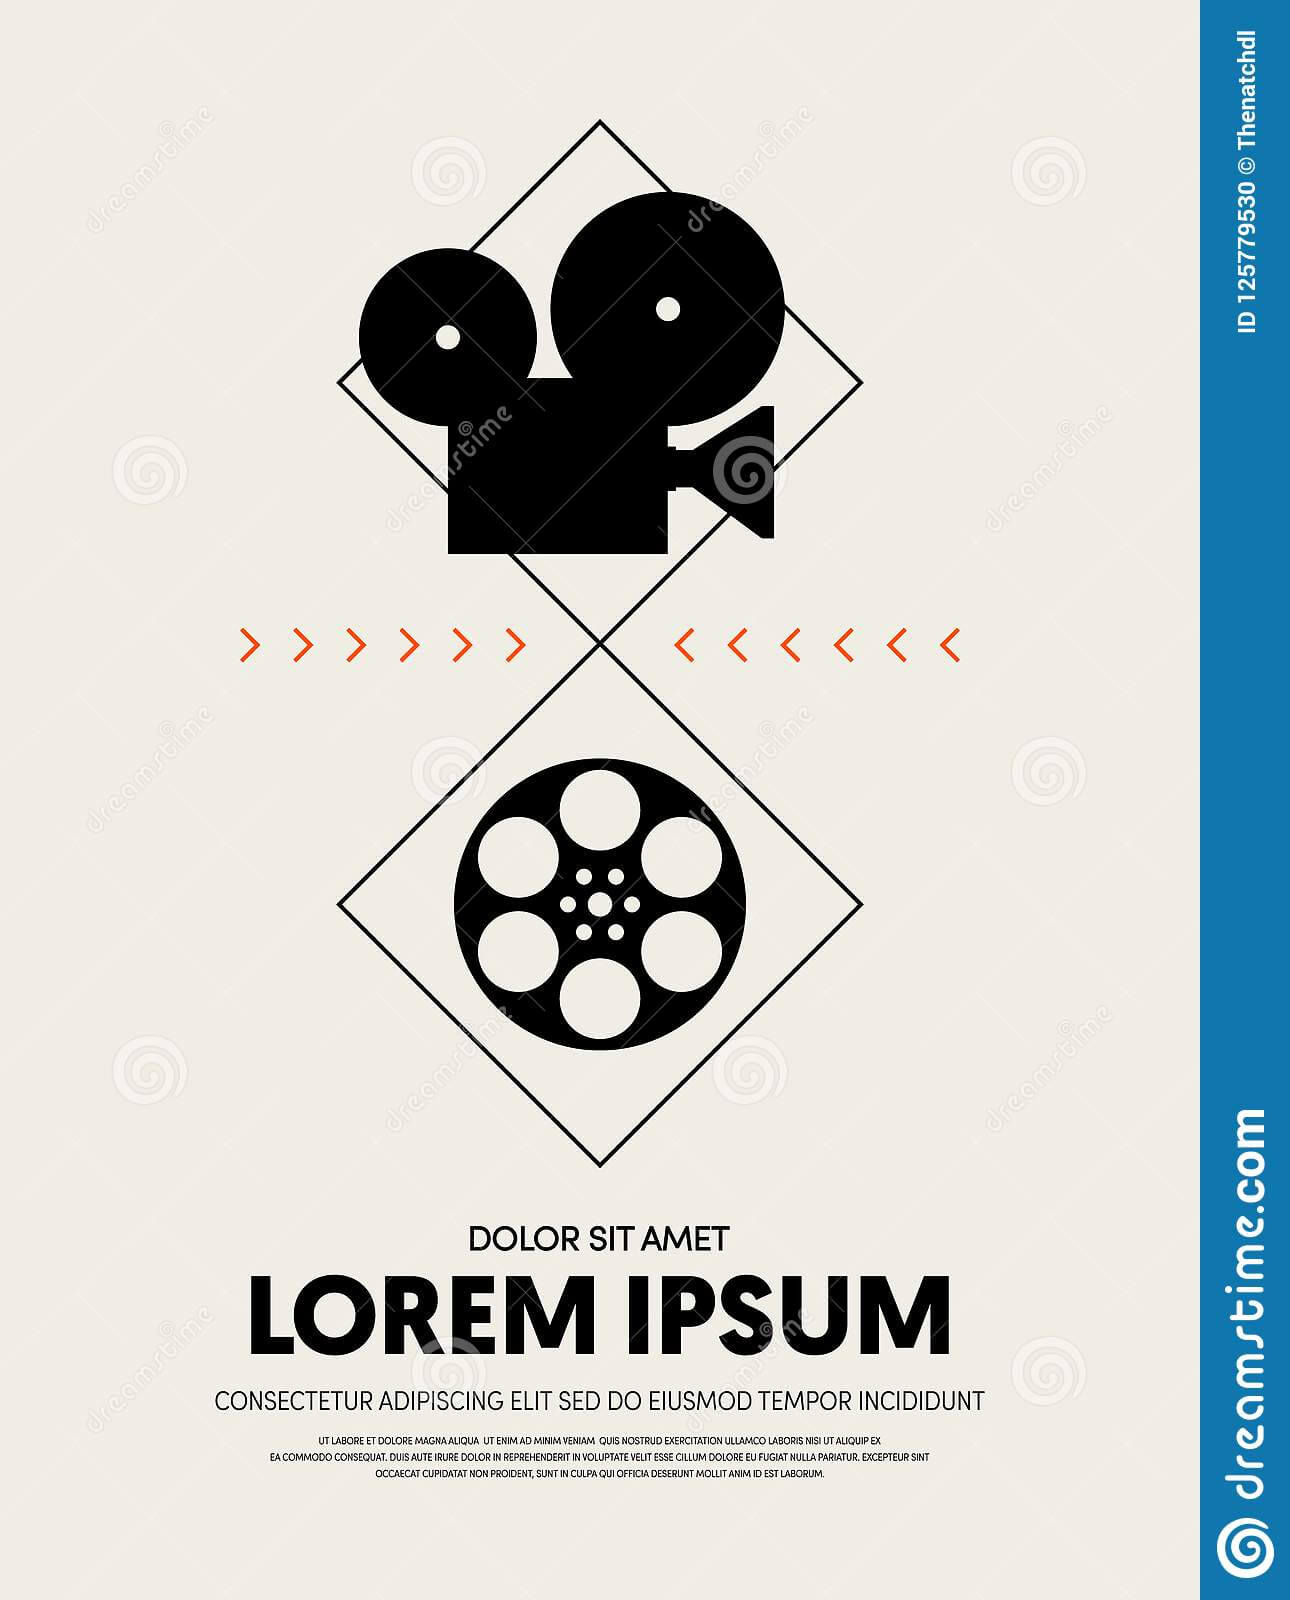 Movie And Film Festival Poster Template Design Stock Throughout Film Festival Brochure Template